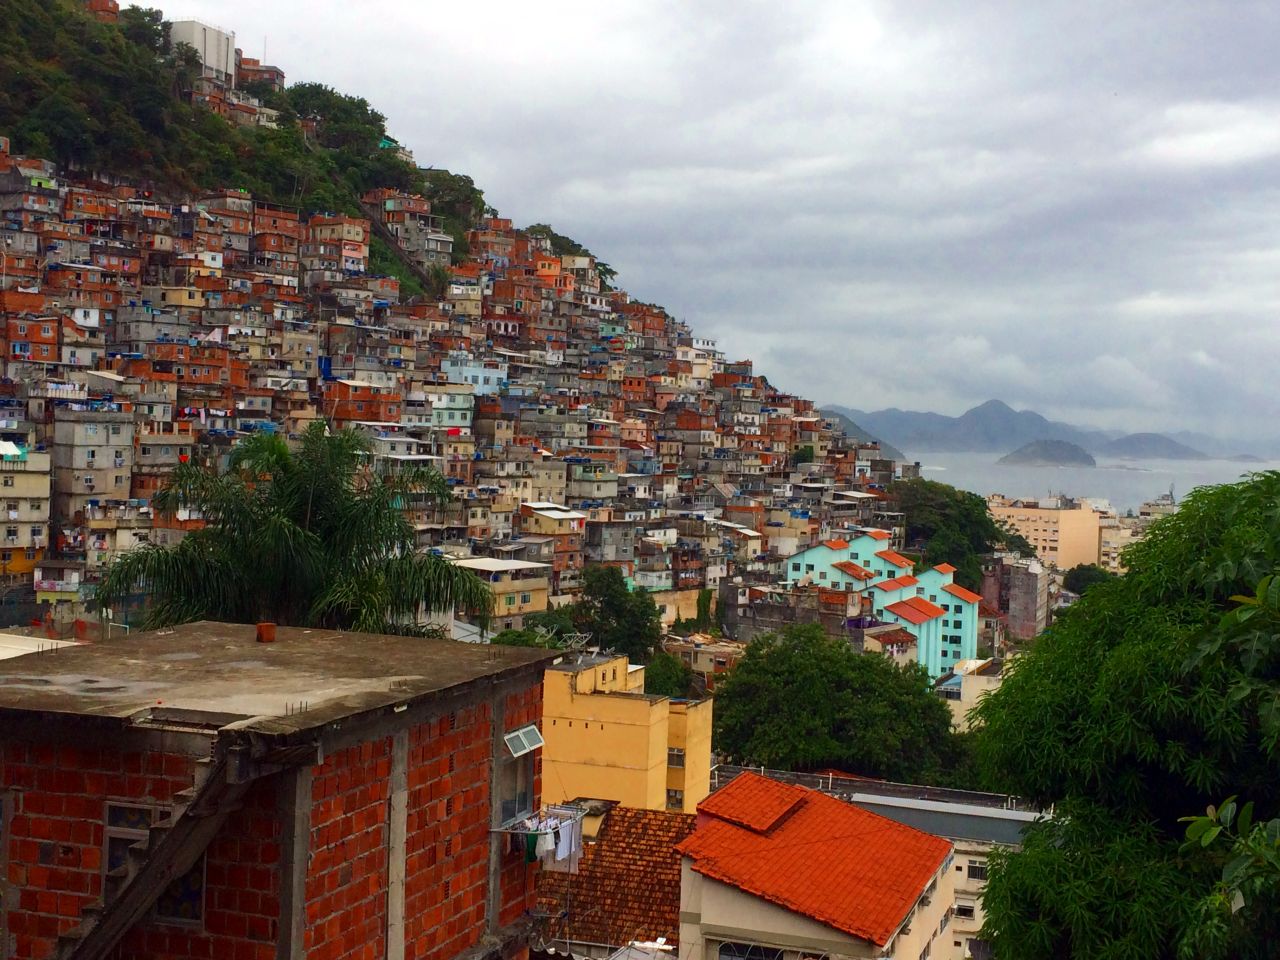 It's been estimated that there are over one million people living in Rio de Janeiro's favelas.